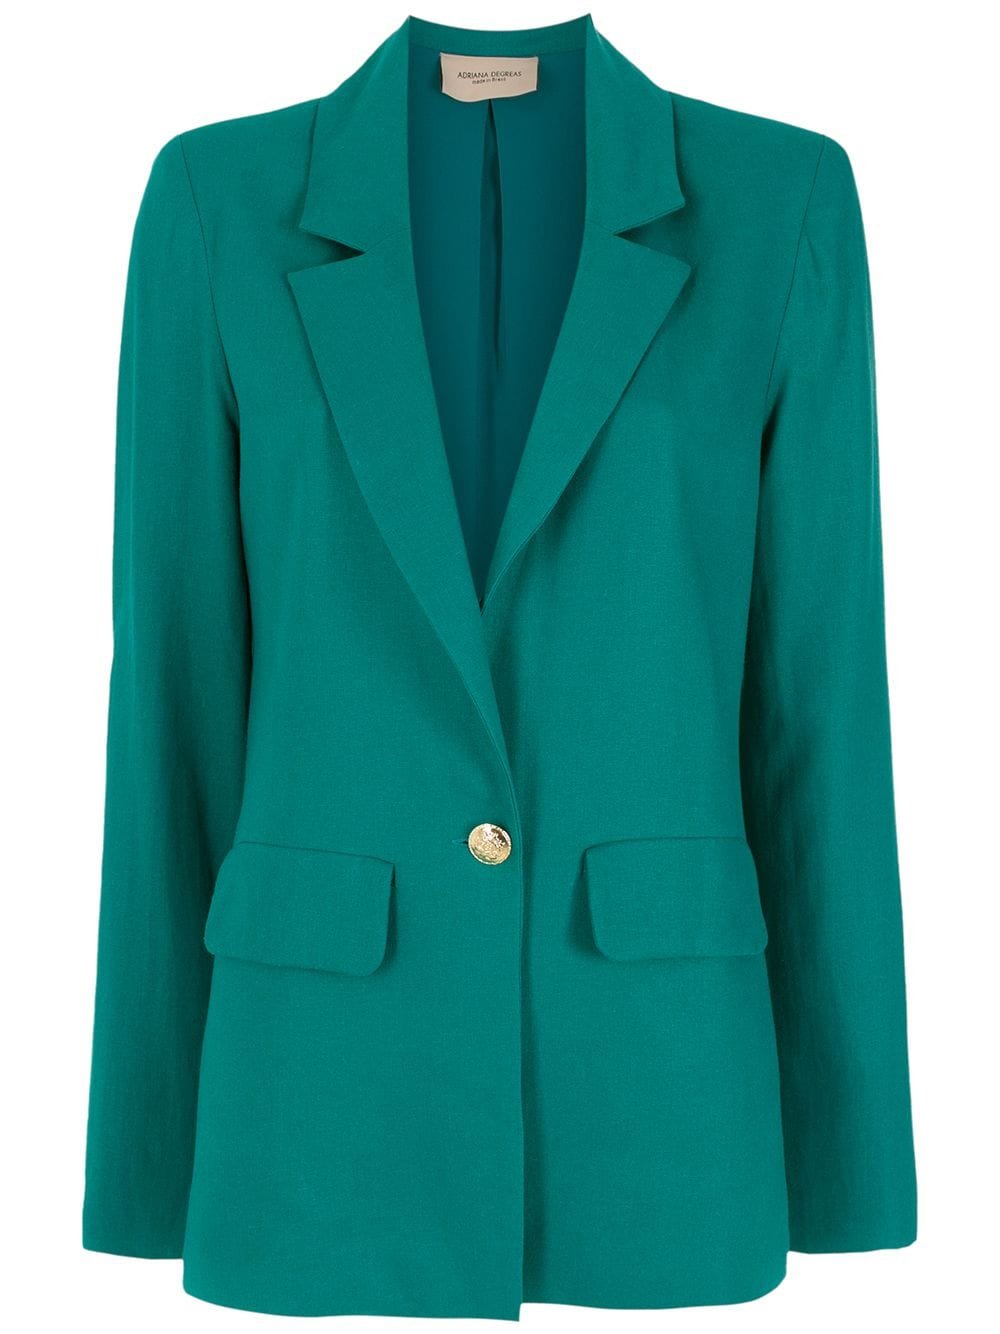 Solid Turquoise Blazer With Button Product